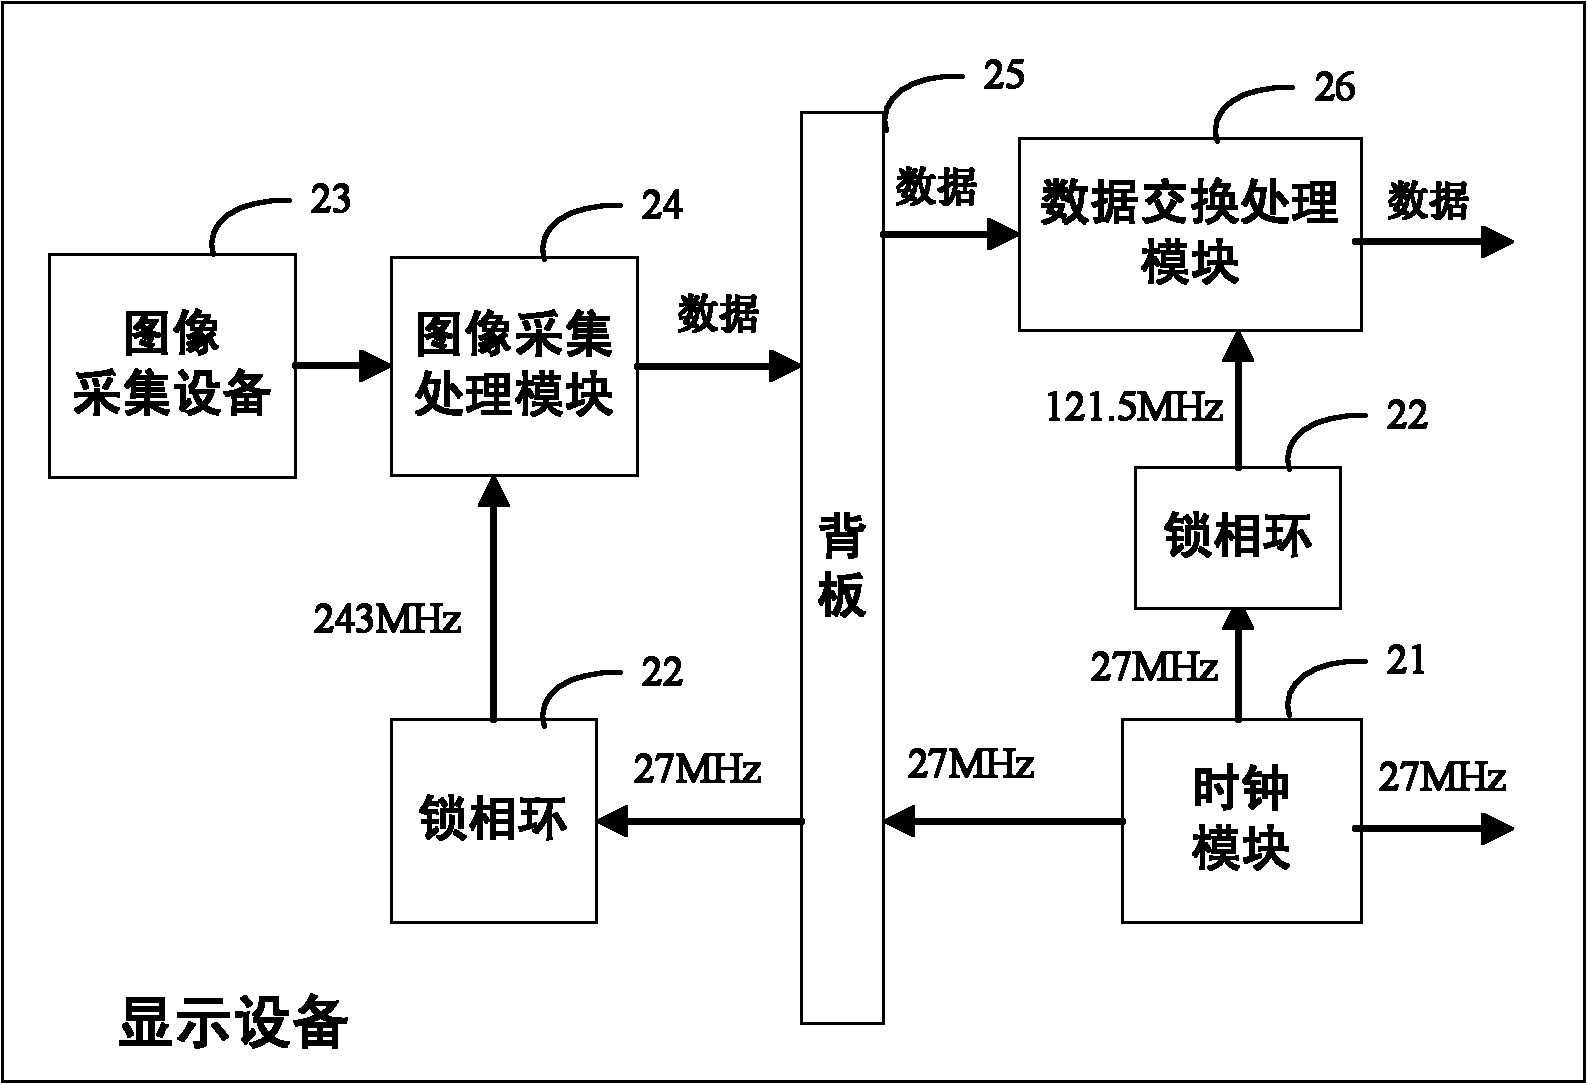 Display processing equipment and multi-screen display system